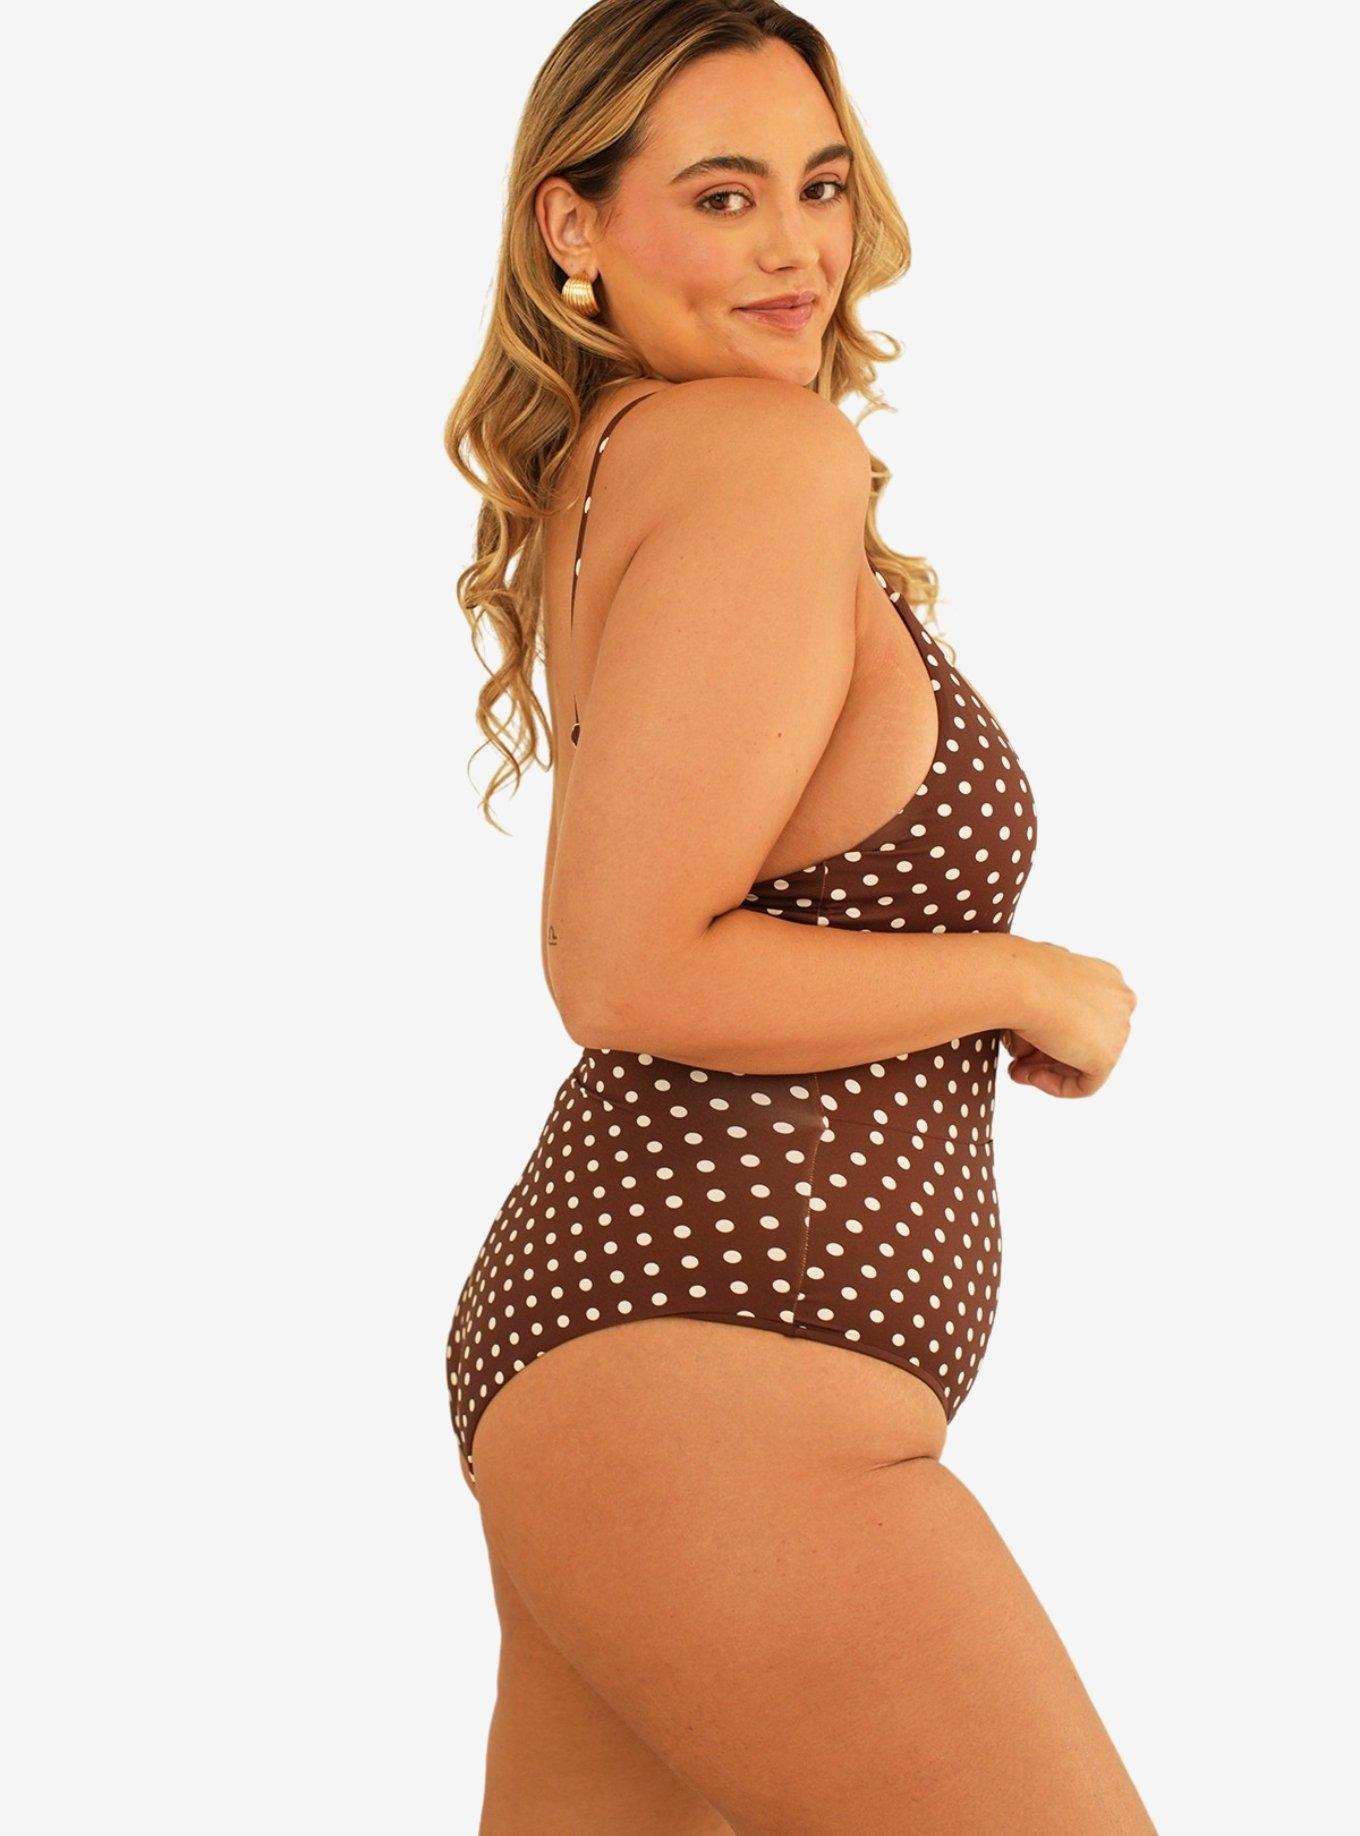 Dippin' Daisy's Bliss Moderate Coverage Swim One Piece Dotted Brown